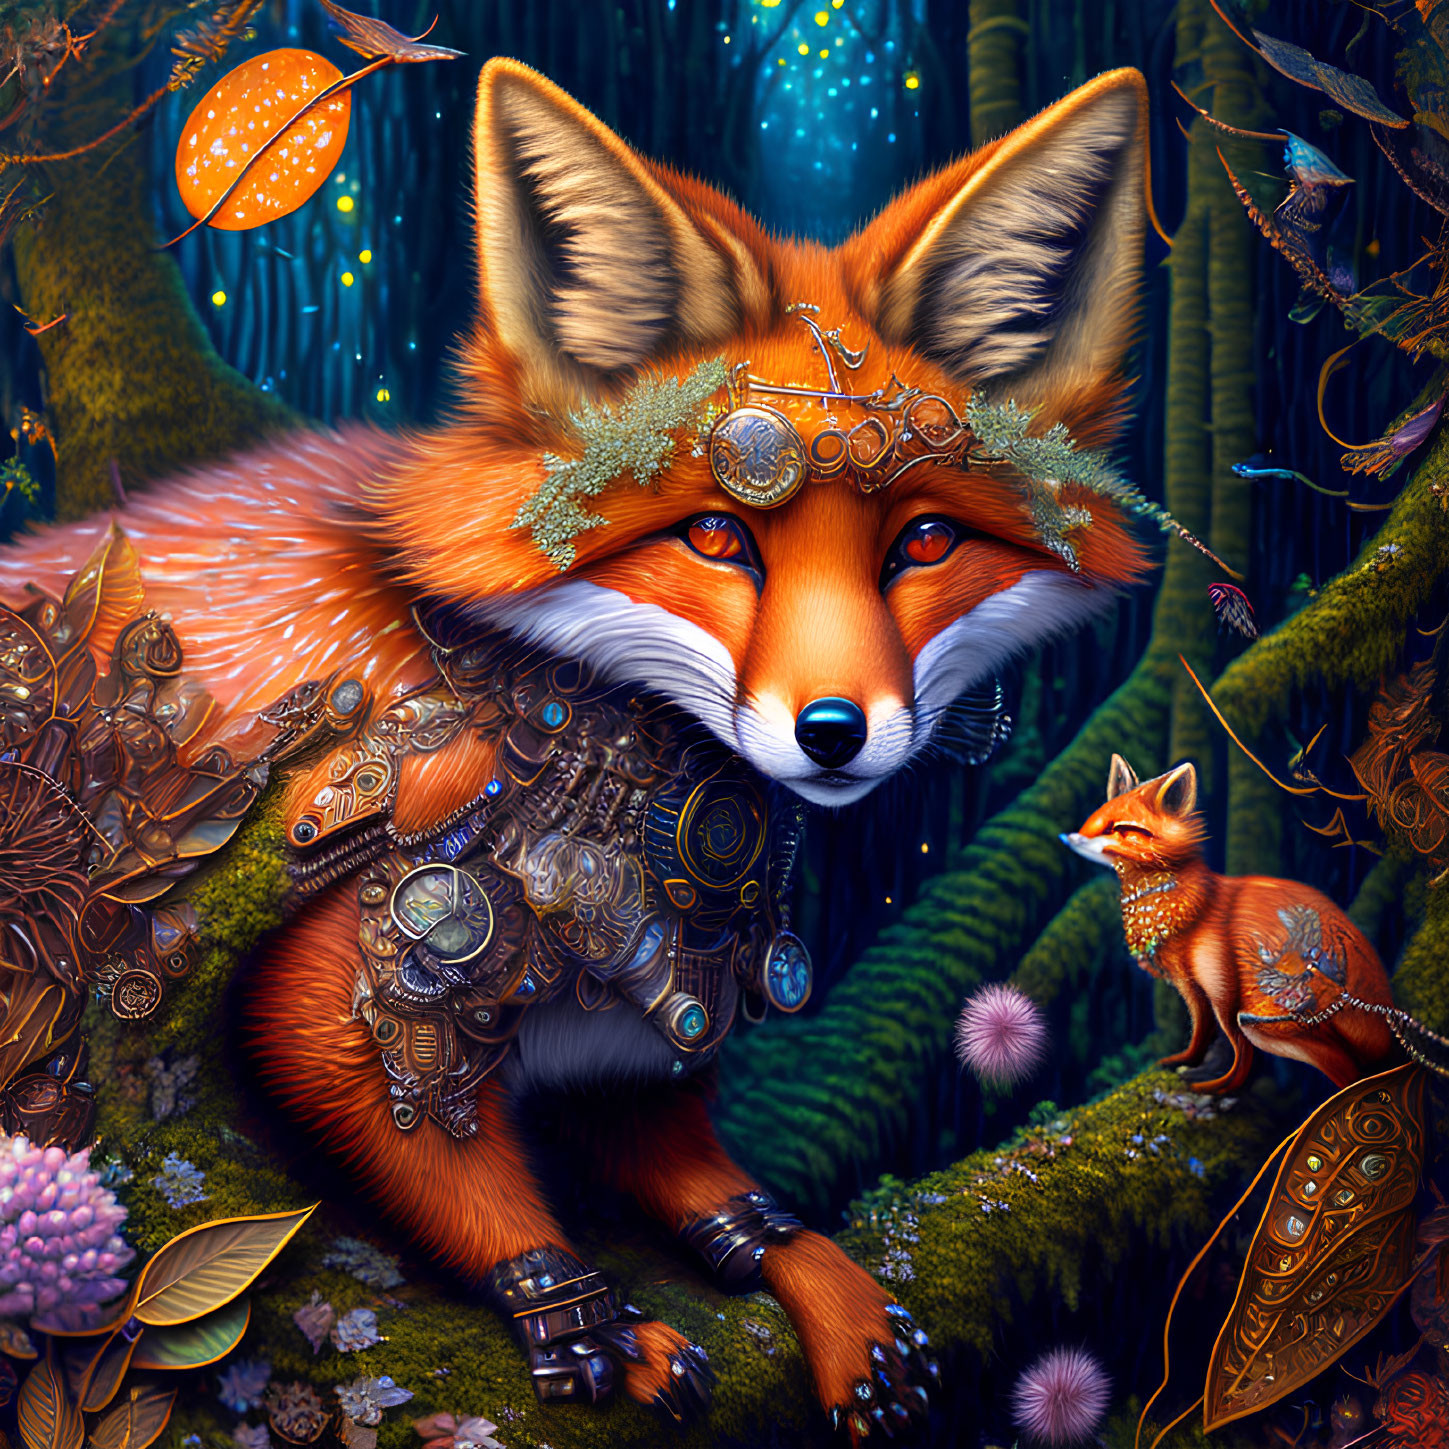 Mechanical-armor-clad fox with smaller companion in mystical forest setting